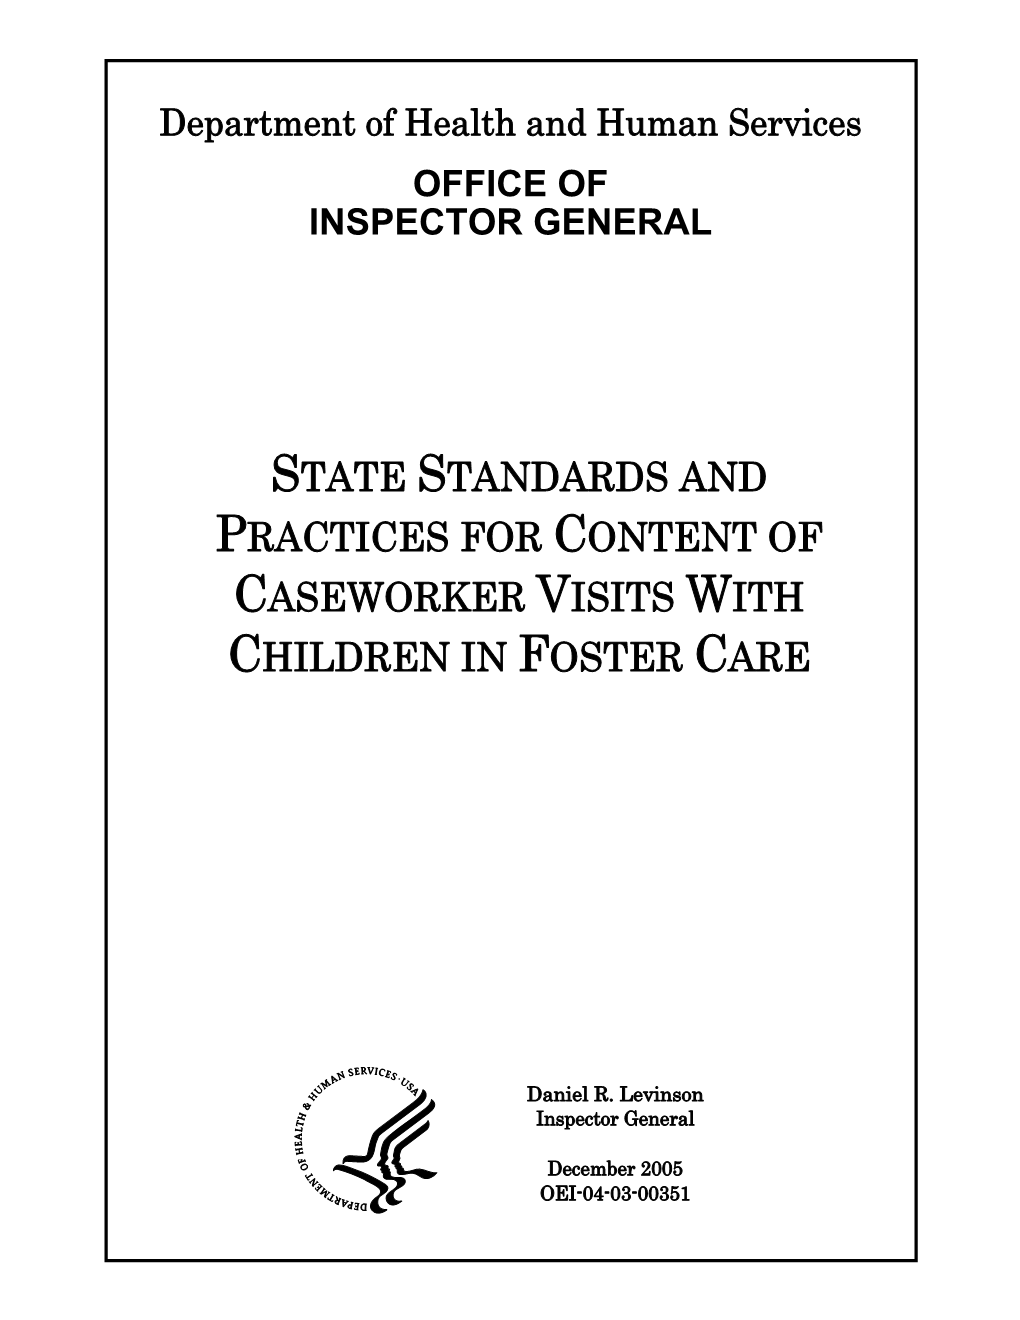 State Standards and Practices for Content of Caseworker Visits with Children in Foster Care